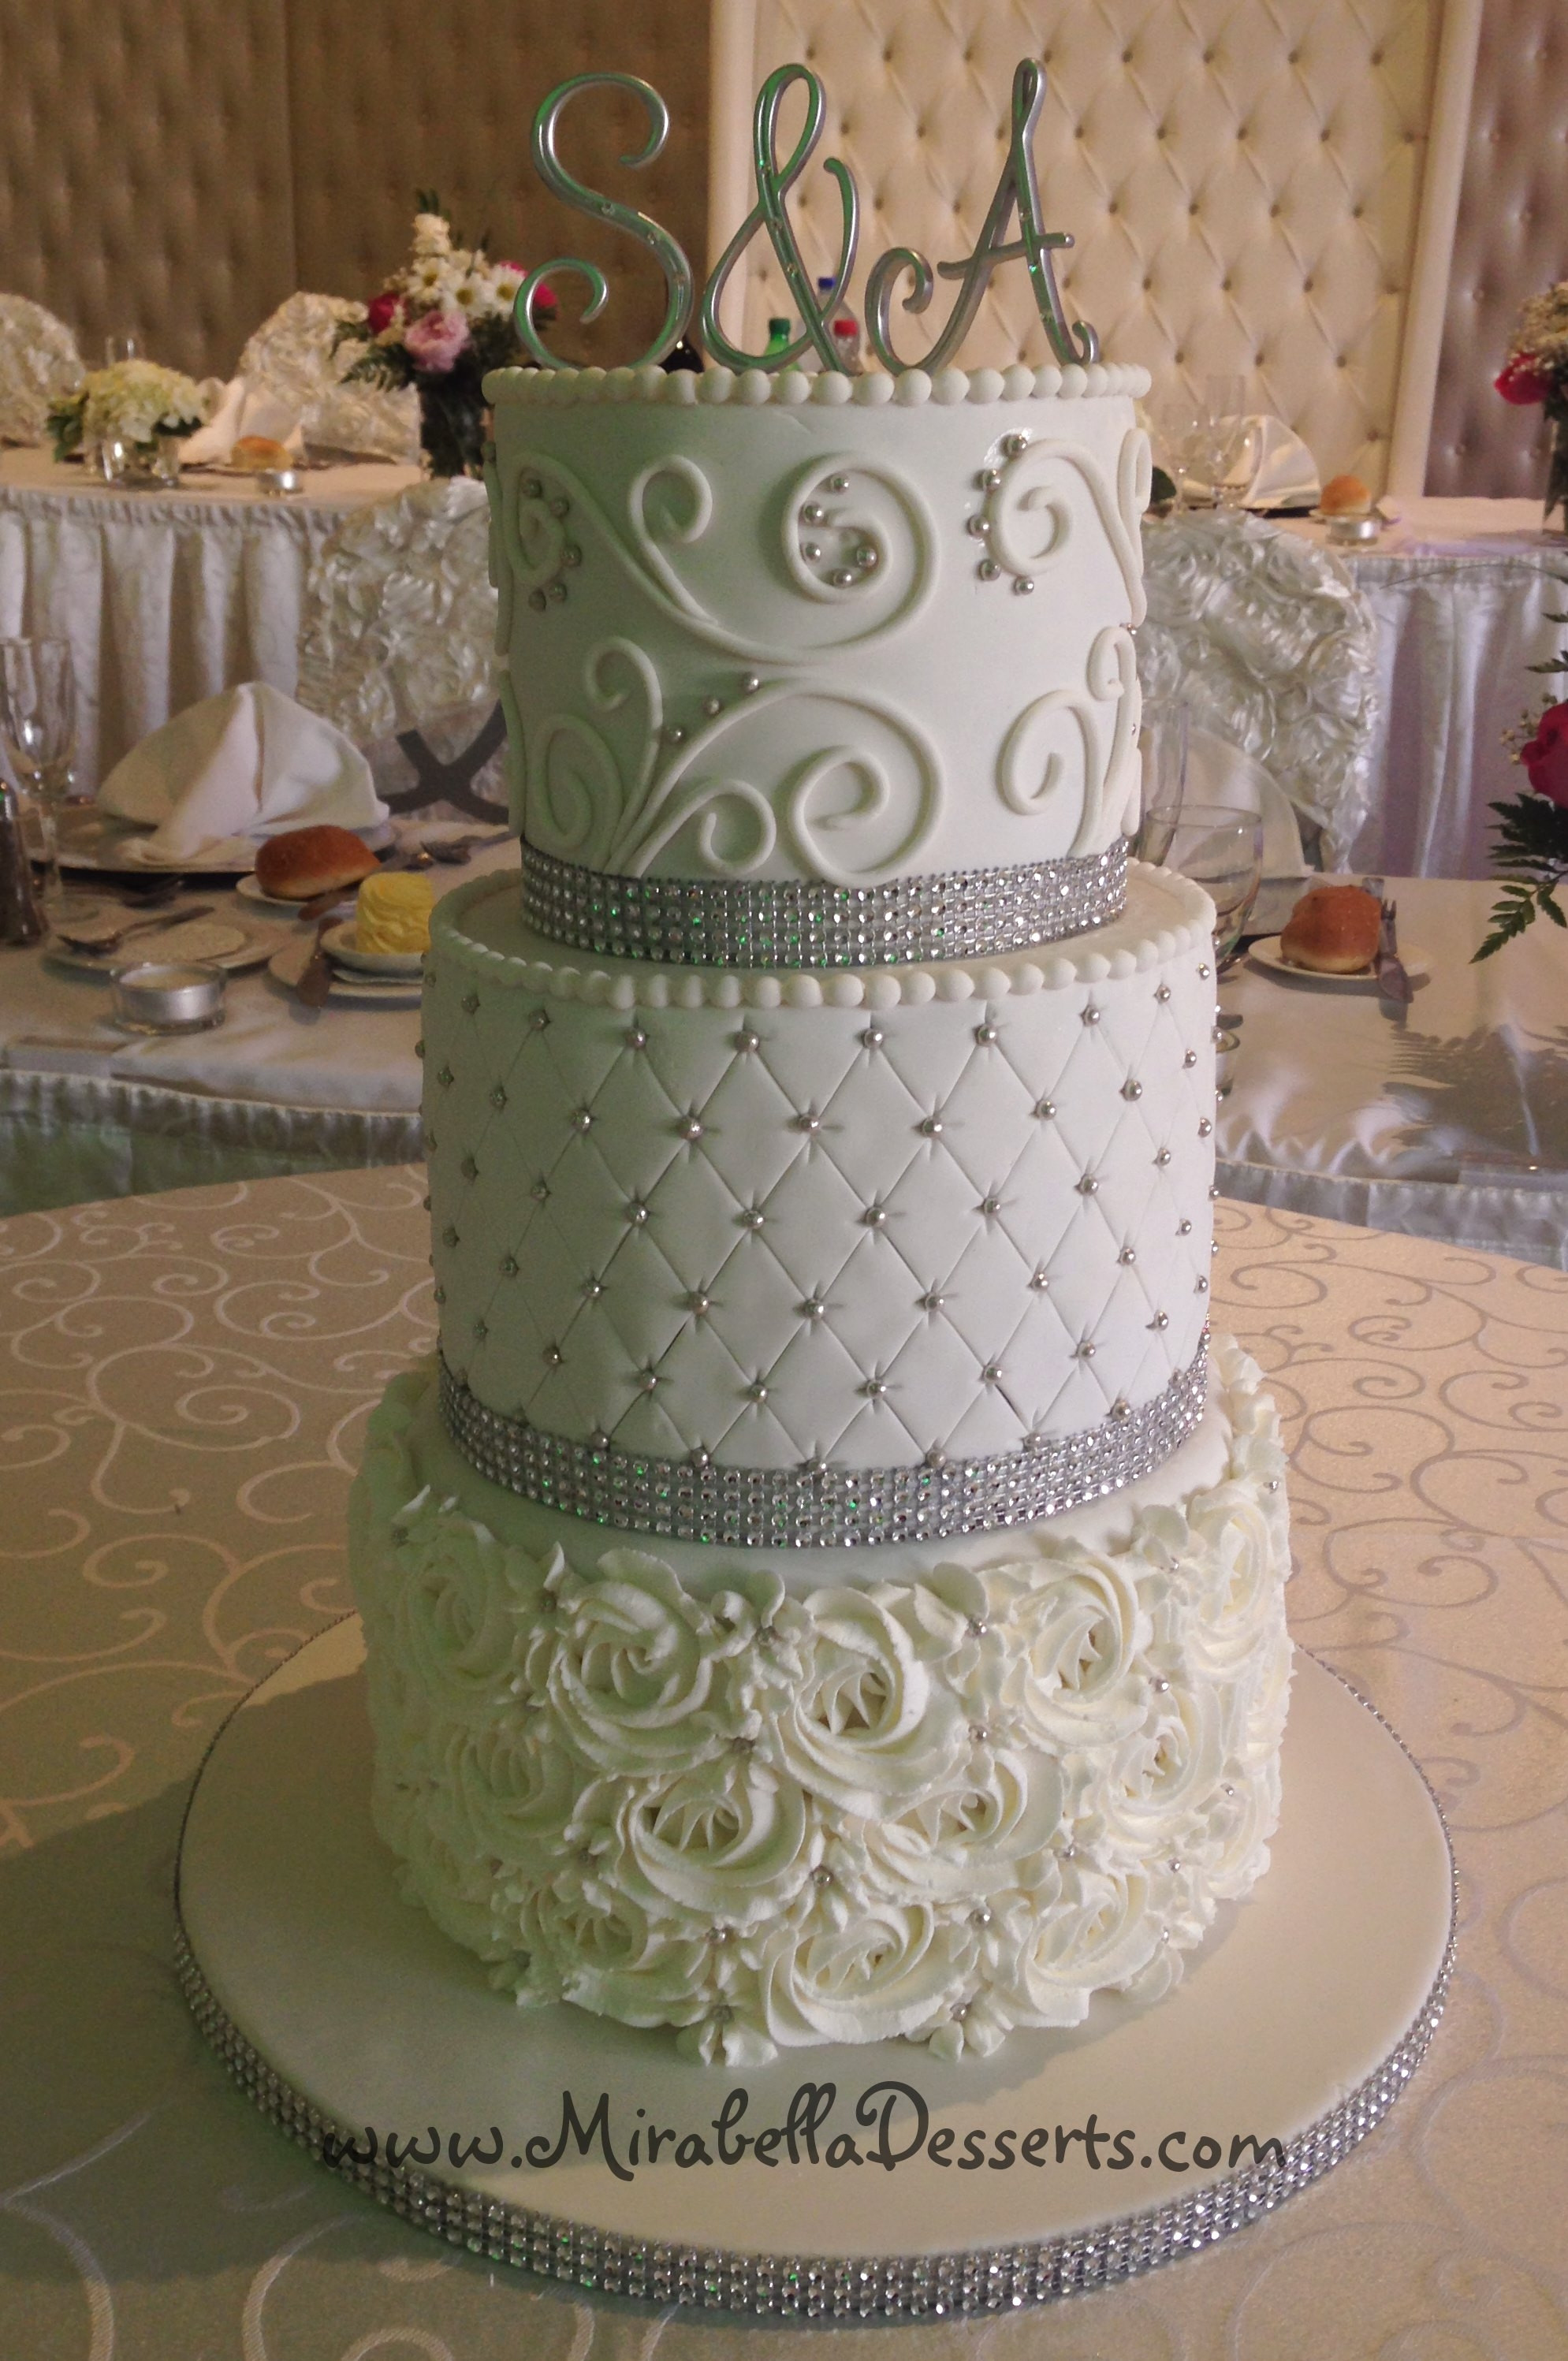 3 Tier Wedding Cakes Pictures
 3 Tier All White Wedding Cake Decorated With Buttercream